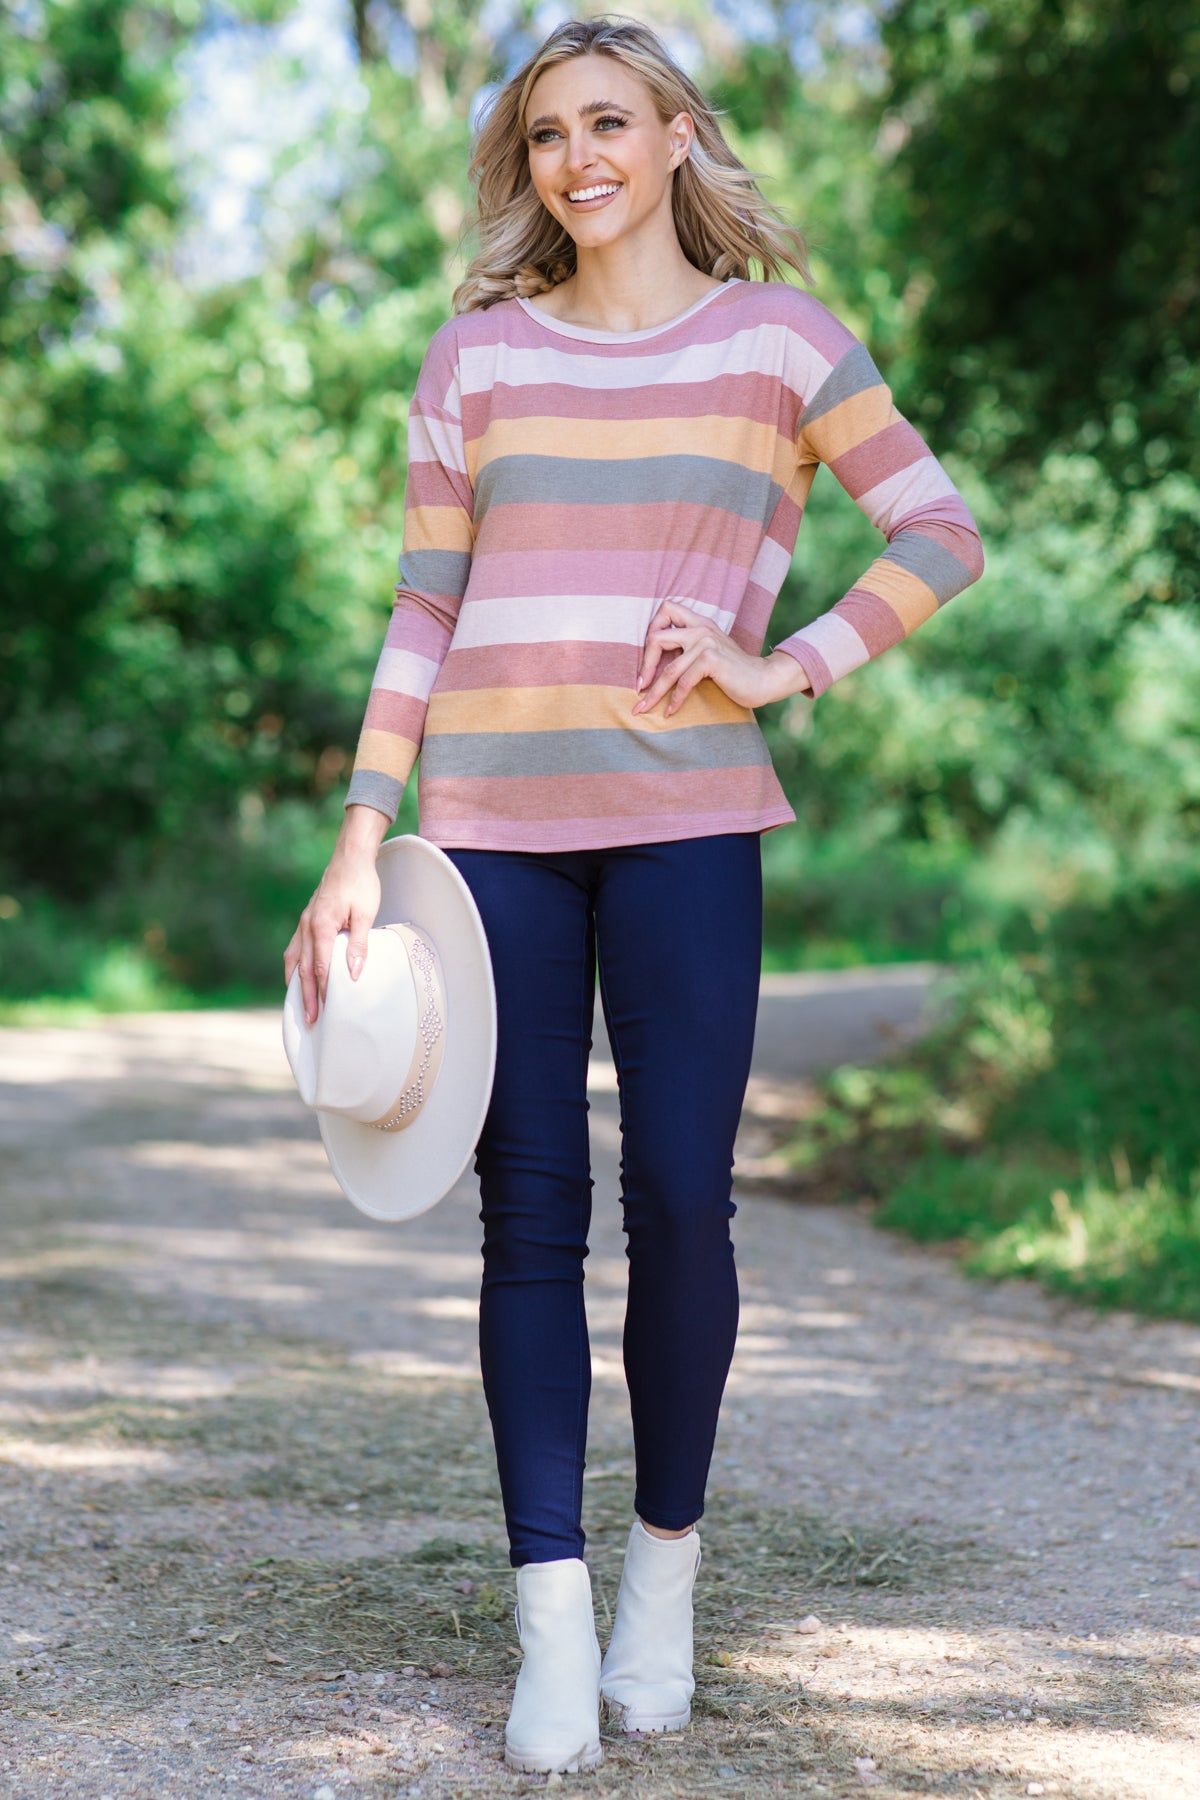 Terra Cotta and Mustard Multicolor Stripe Top - Filly Flair